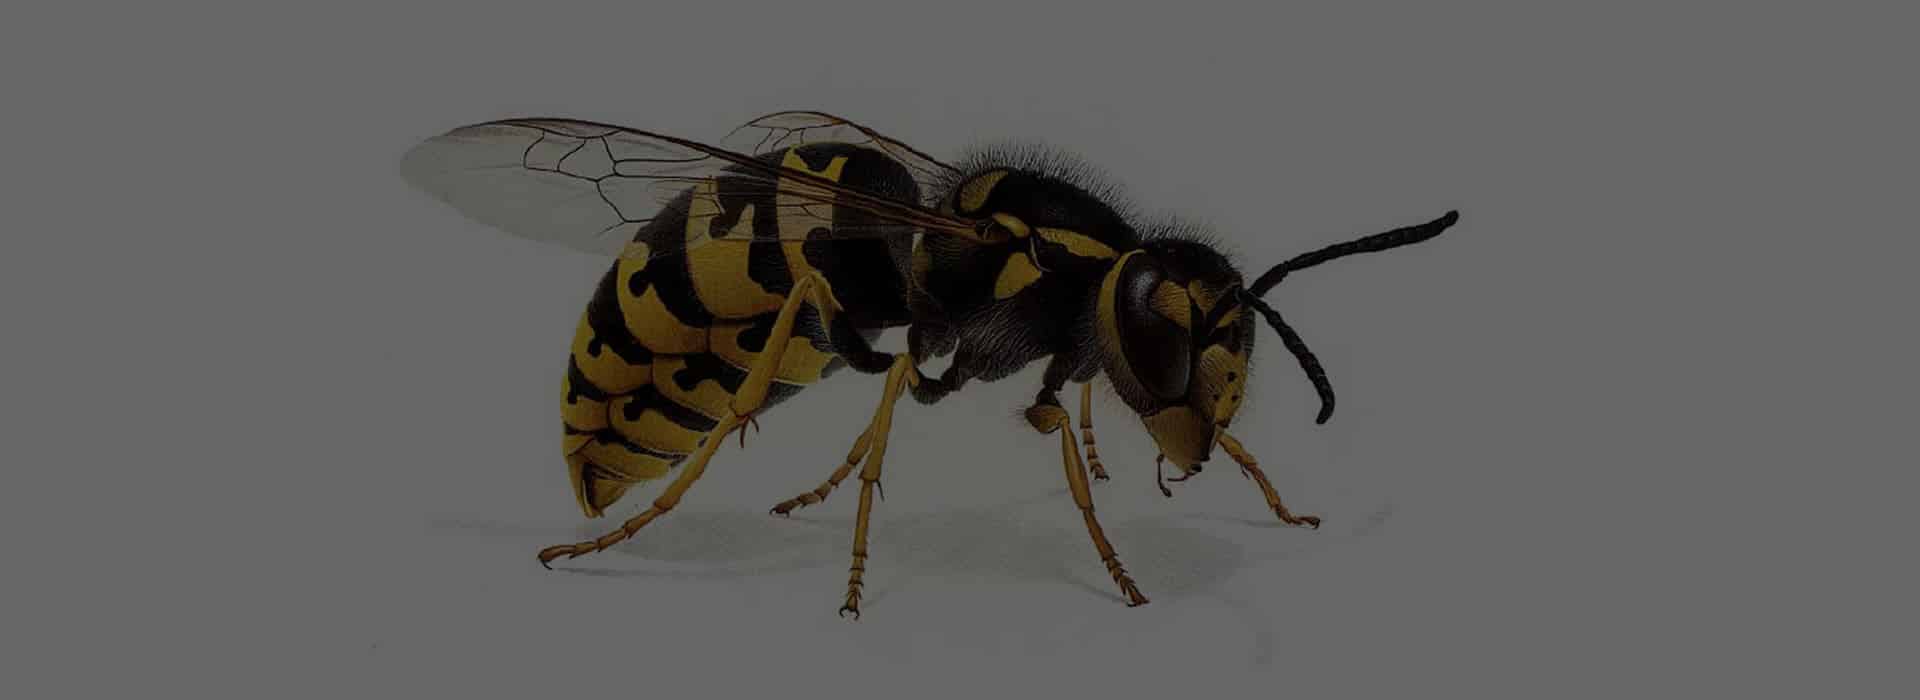 Pest-Control-Bolton-Wasp-Nest-Removal